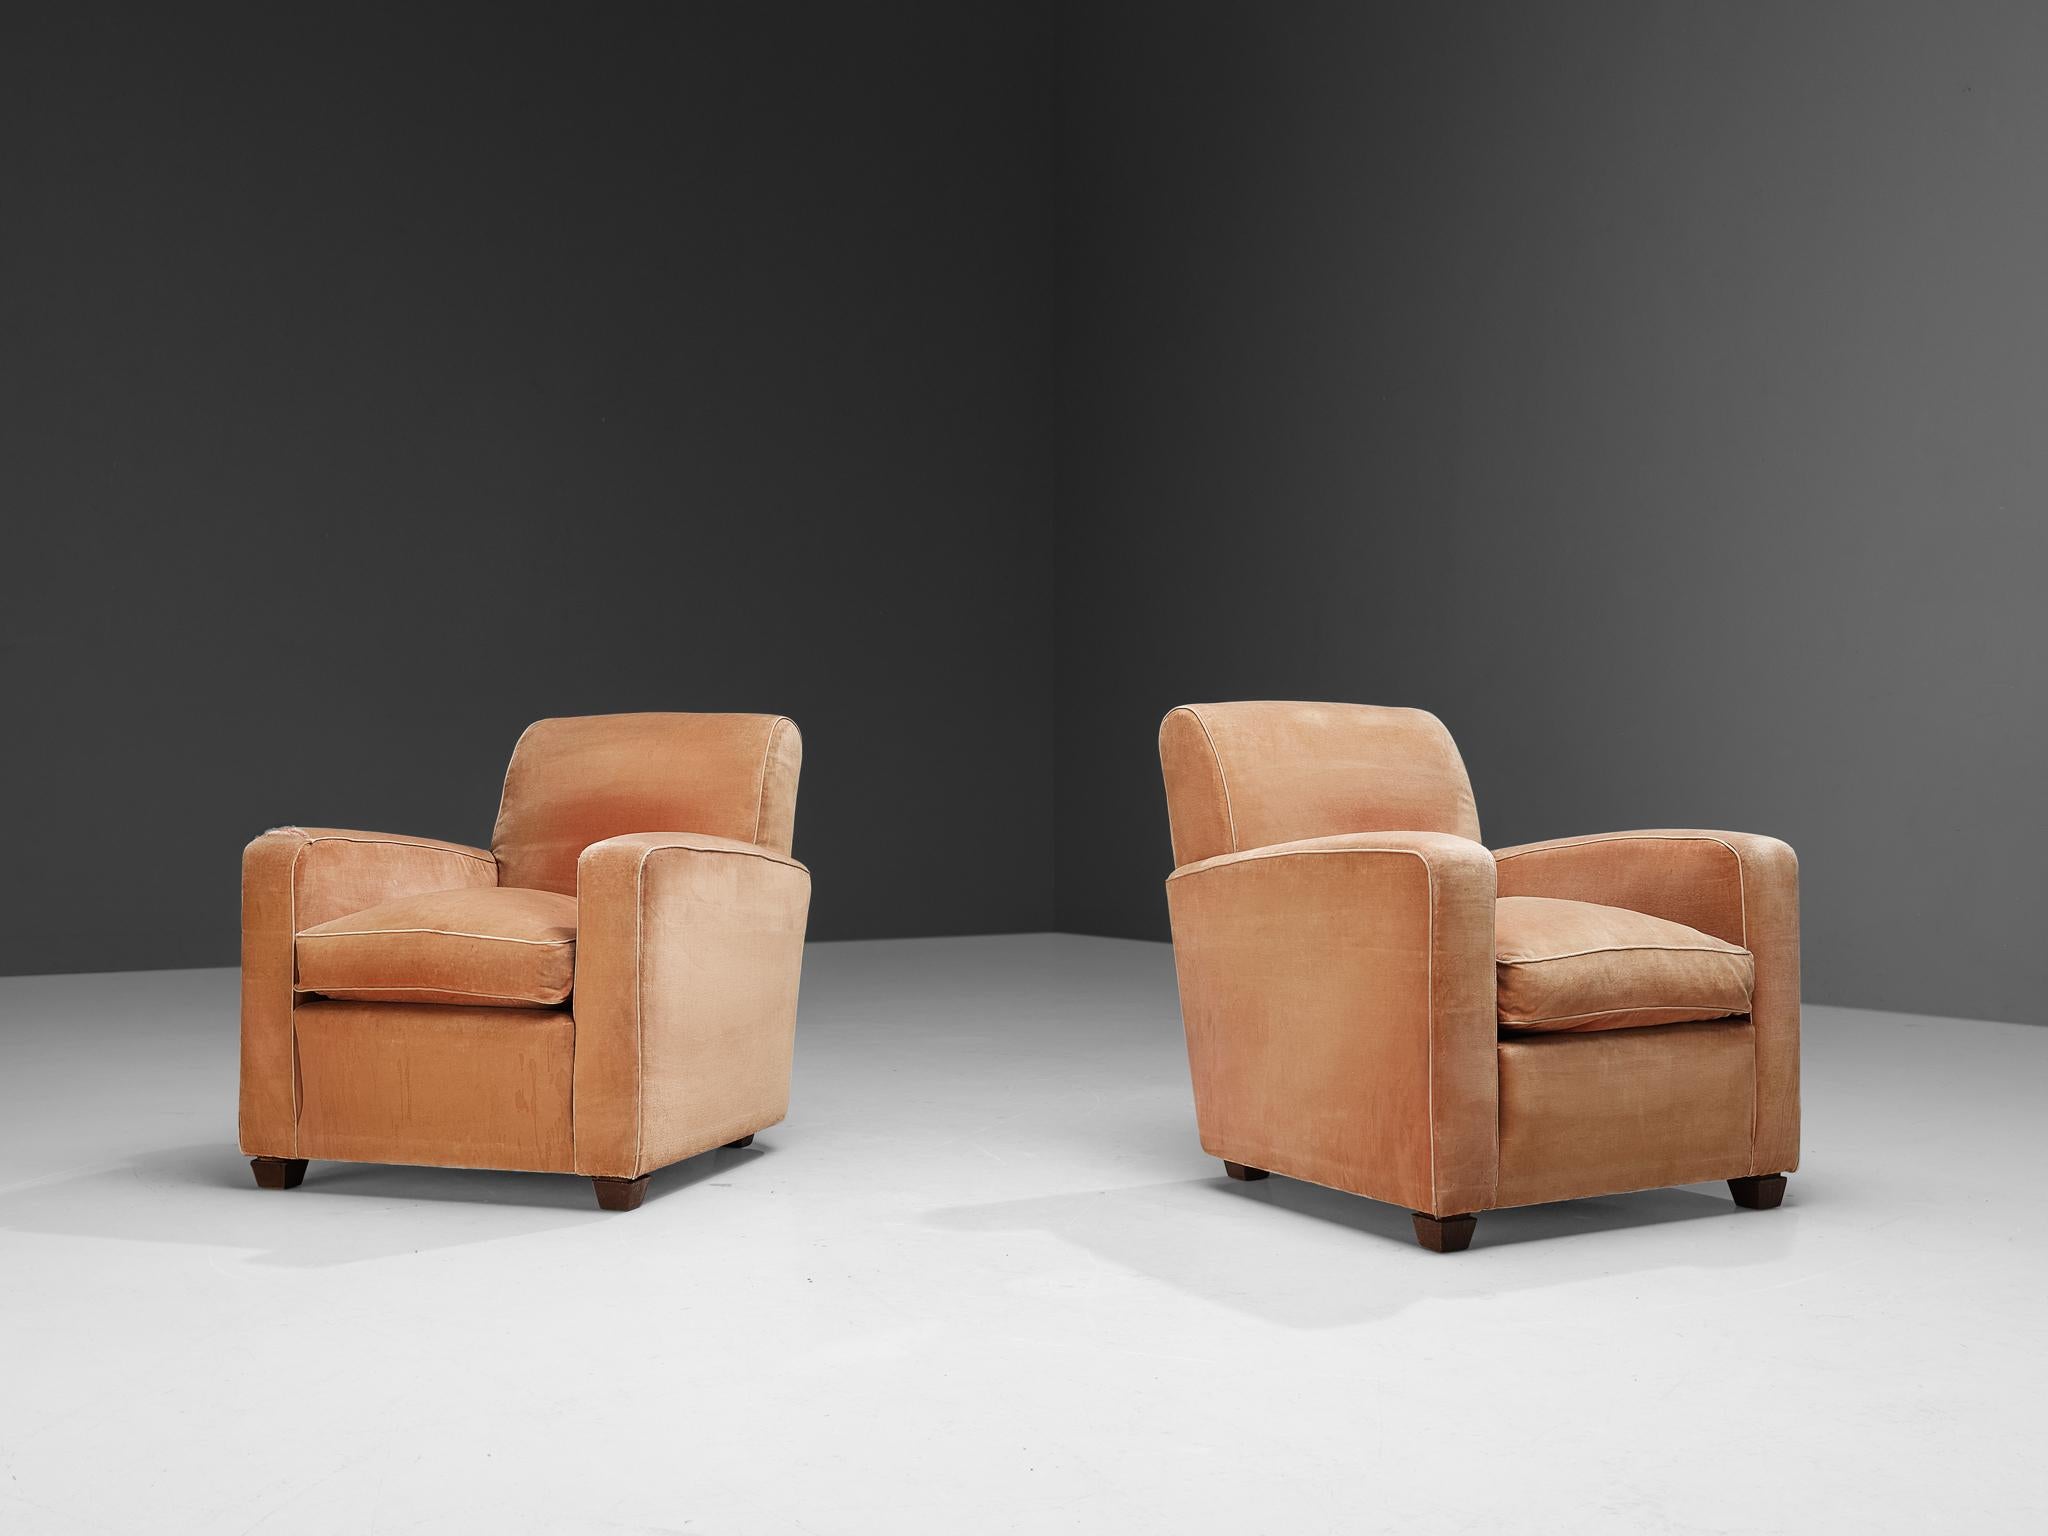 Guglielmo Ulrich, pair of lounge chairs, oak, velvet upholstery, Italy, 1940s
 
Guglielmo Ulrich, an Italian influential designer and architect of the 1940s-1960s, designed this pair of comfortable lounge chairs with a great eye for proportions and